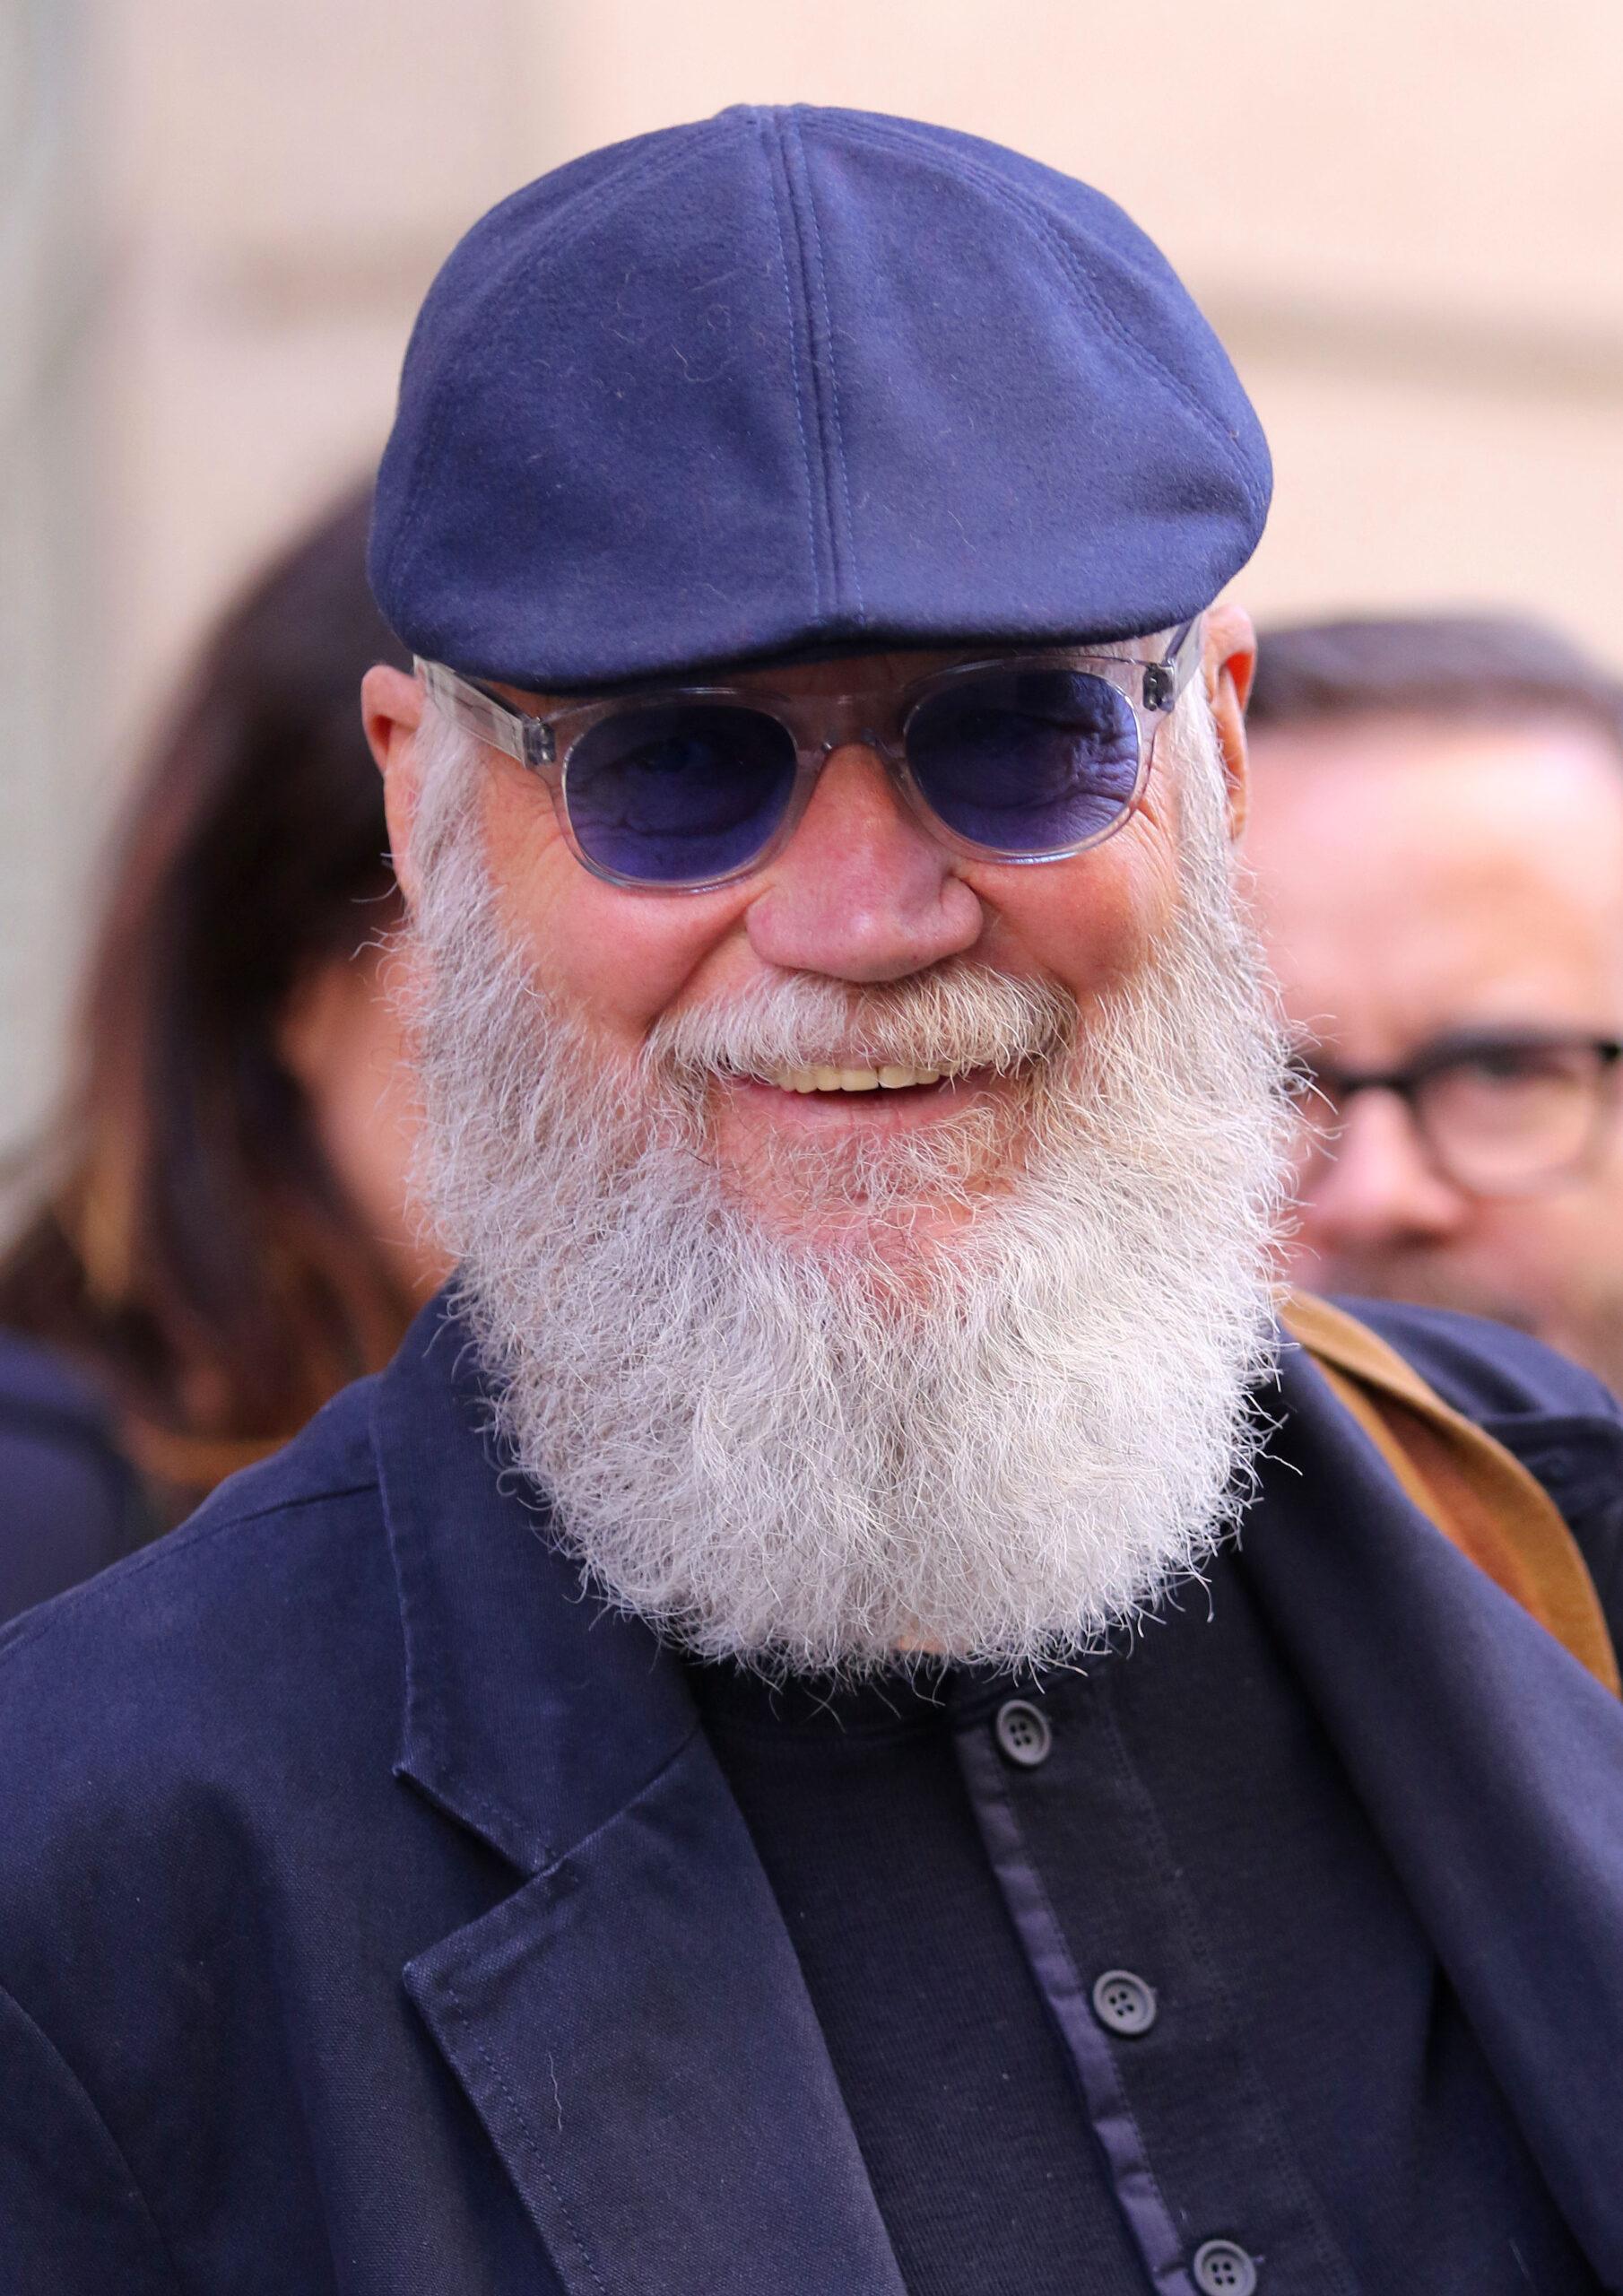 David Letterman looks unrecognizable with full white beard in NYC